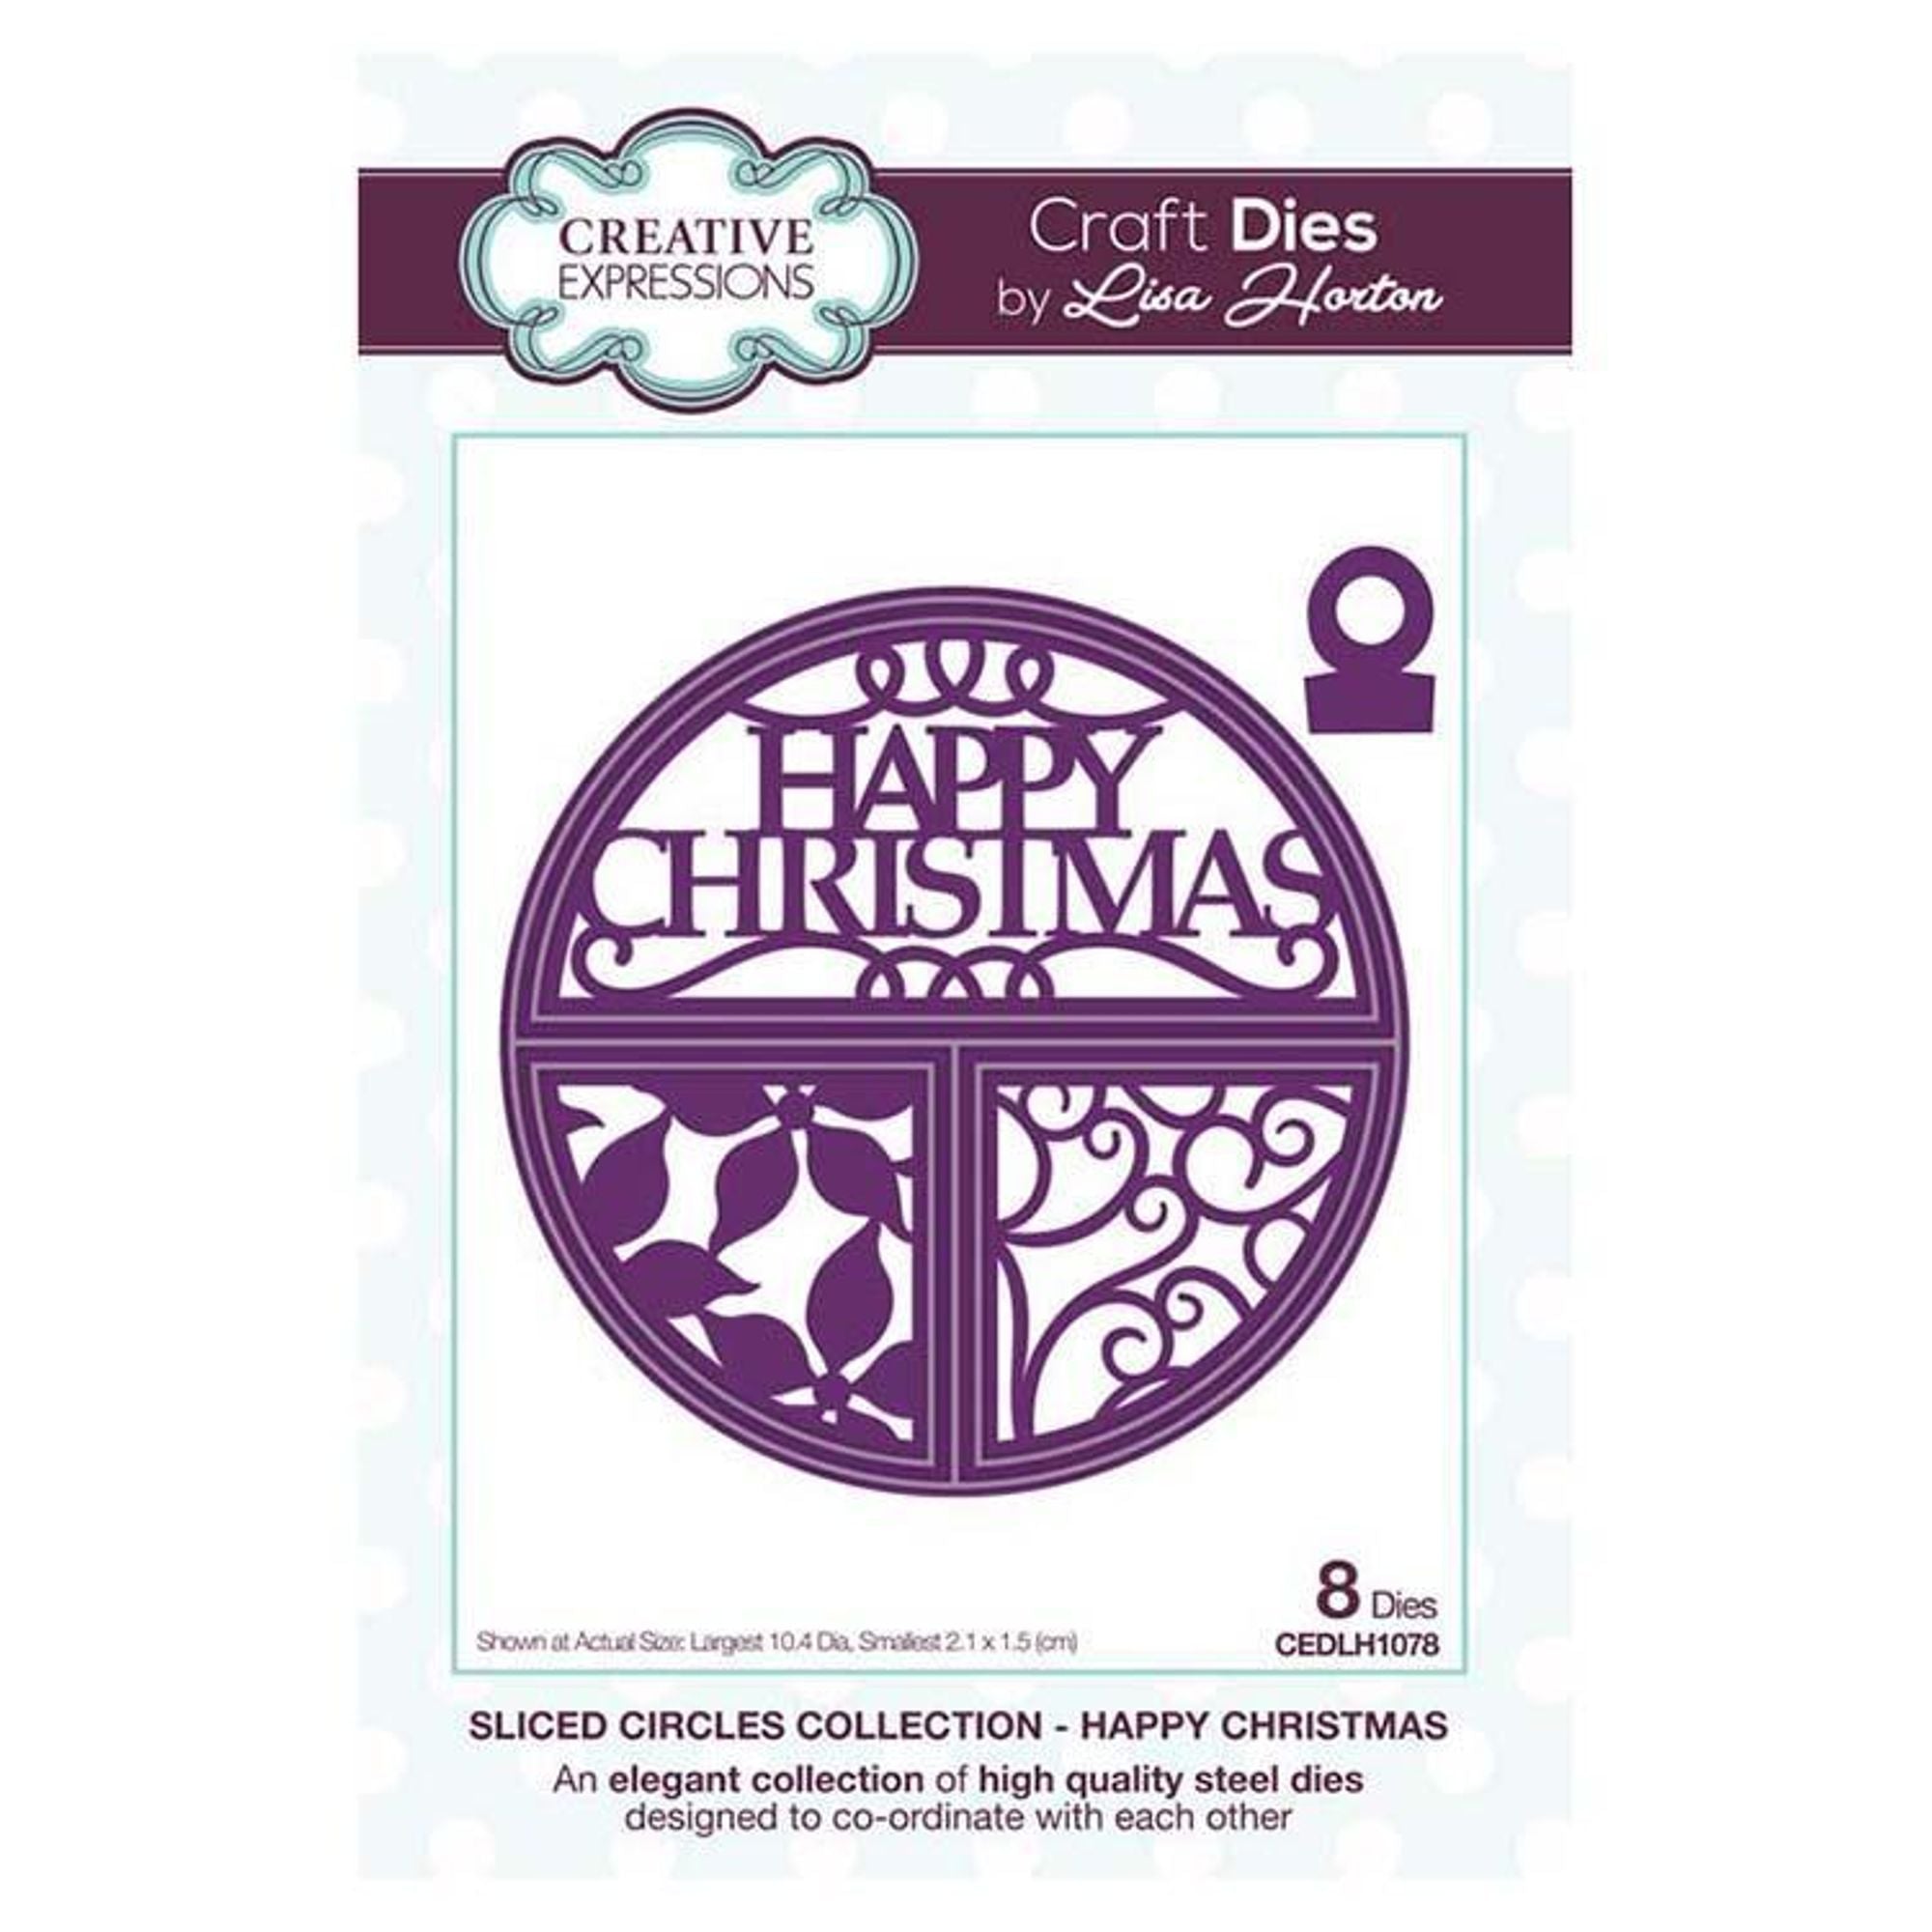 Creative Expressions Split Circles Happy Christmas Craft Die